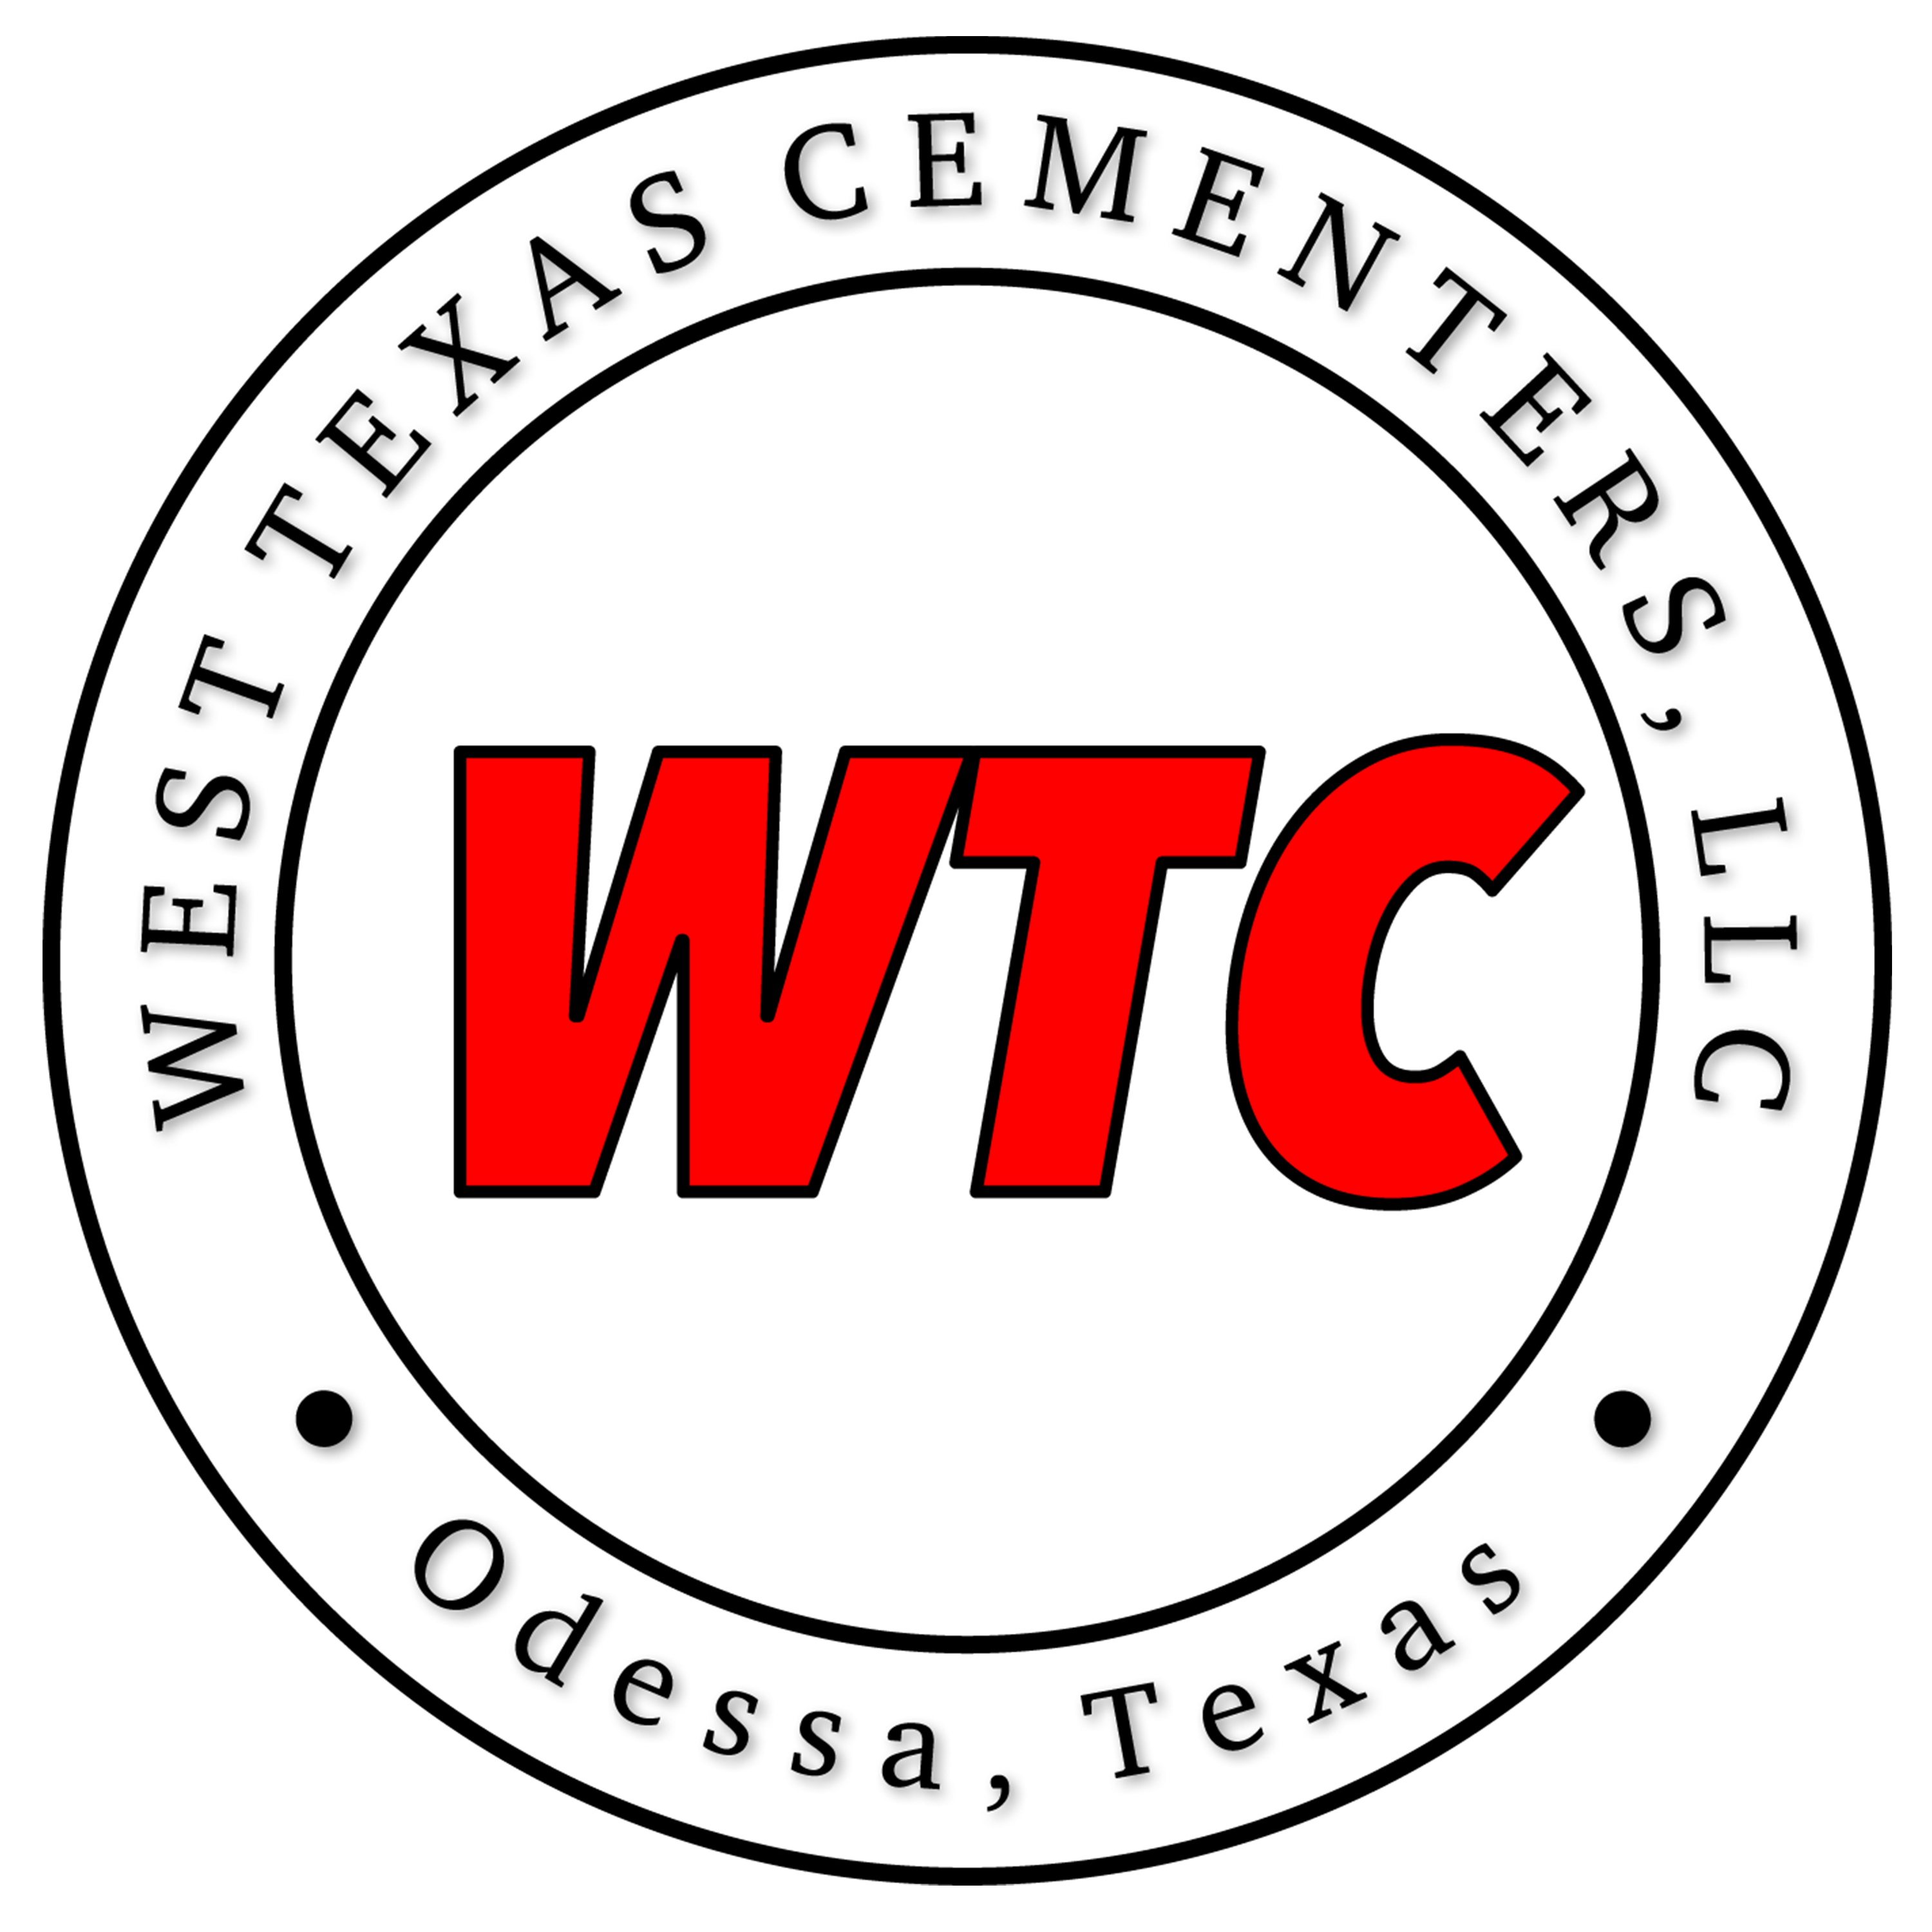 West Texas Cementers